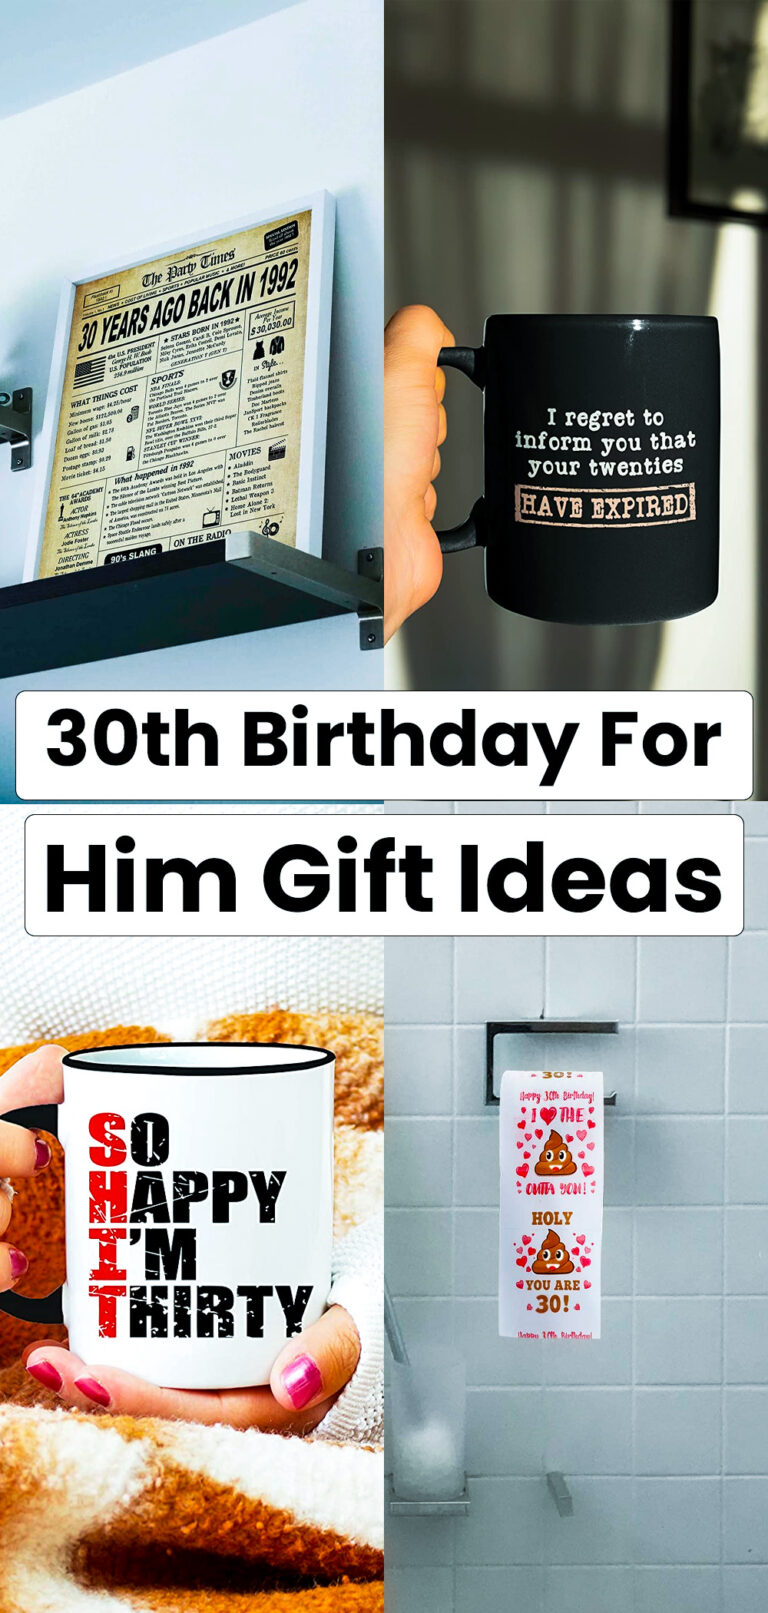 30th Birthday for Him Gift Ideas